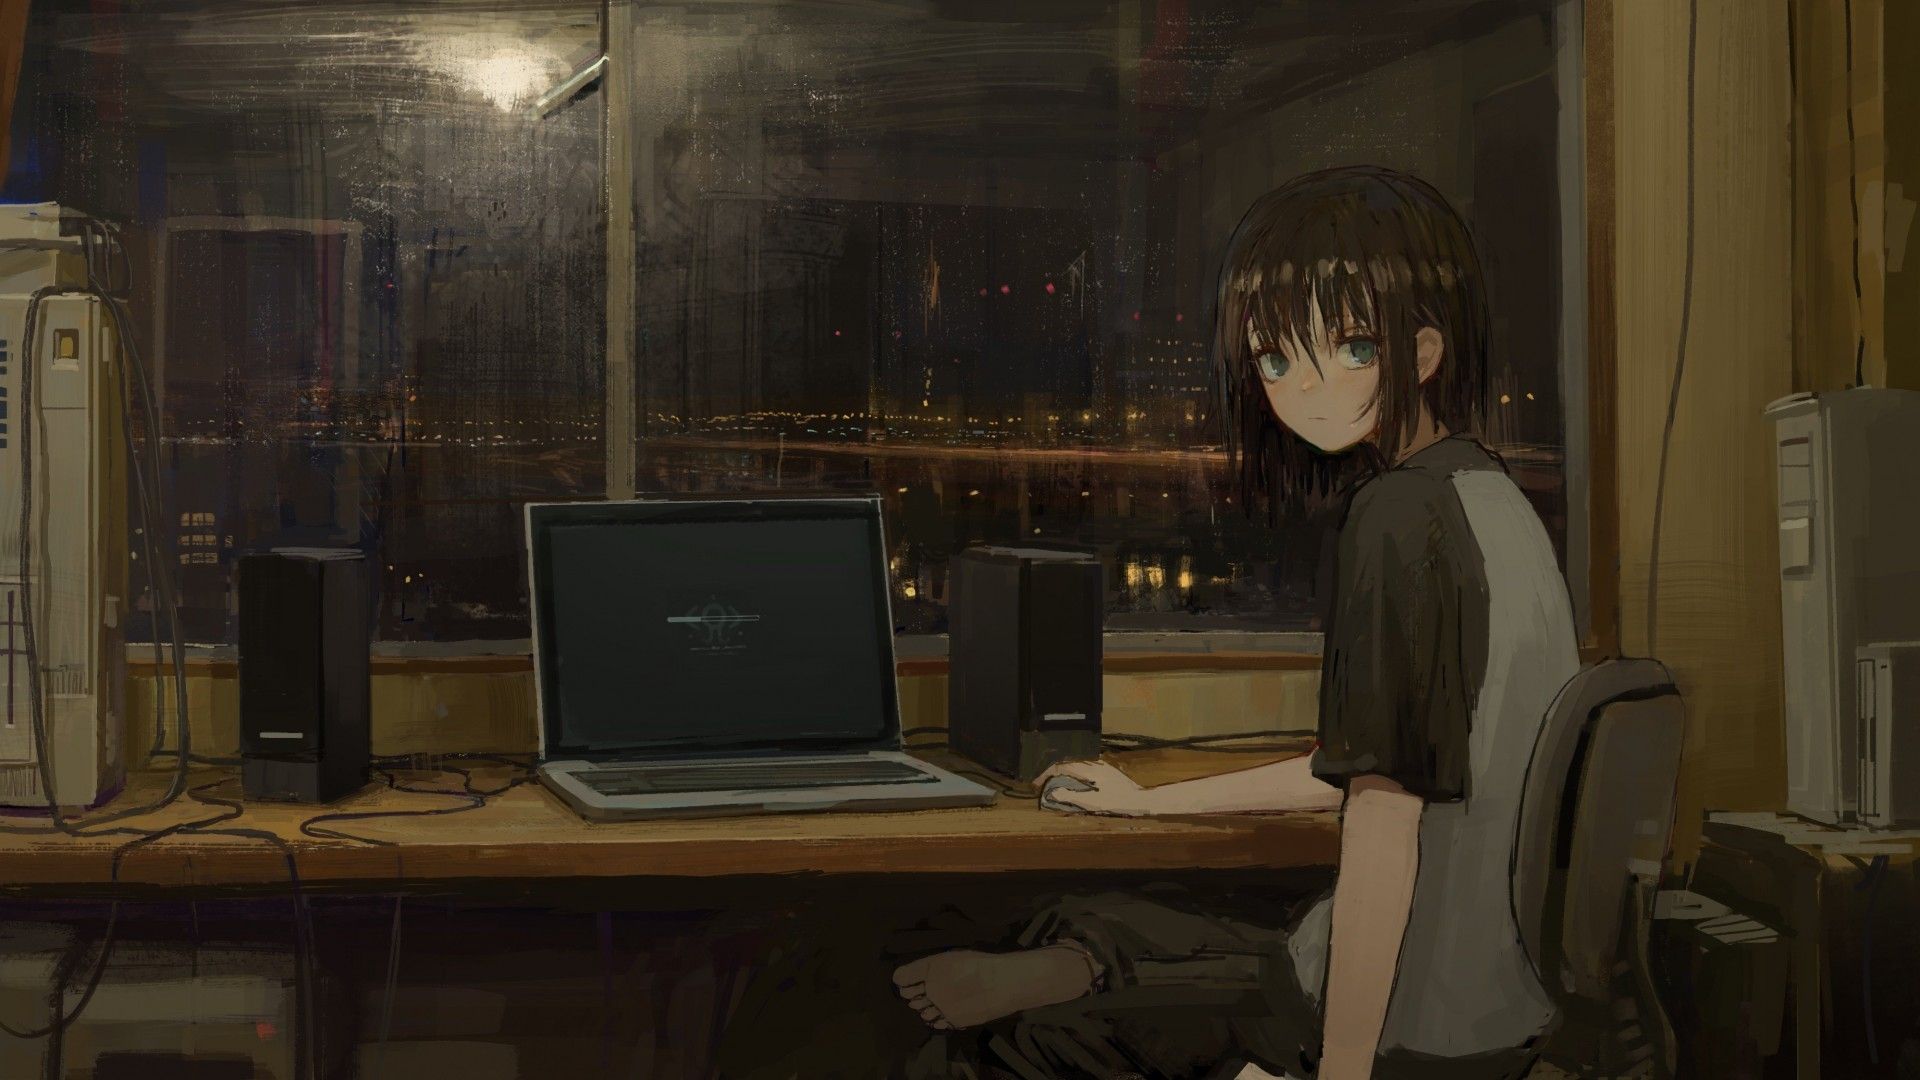 Download 1920x1080 Anime Girl, Room, Bored, Brown Hair, Slice Of